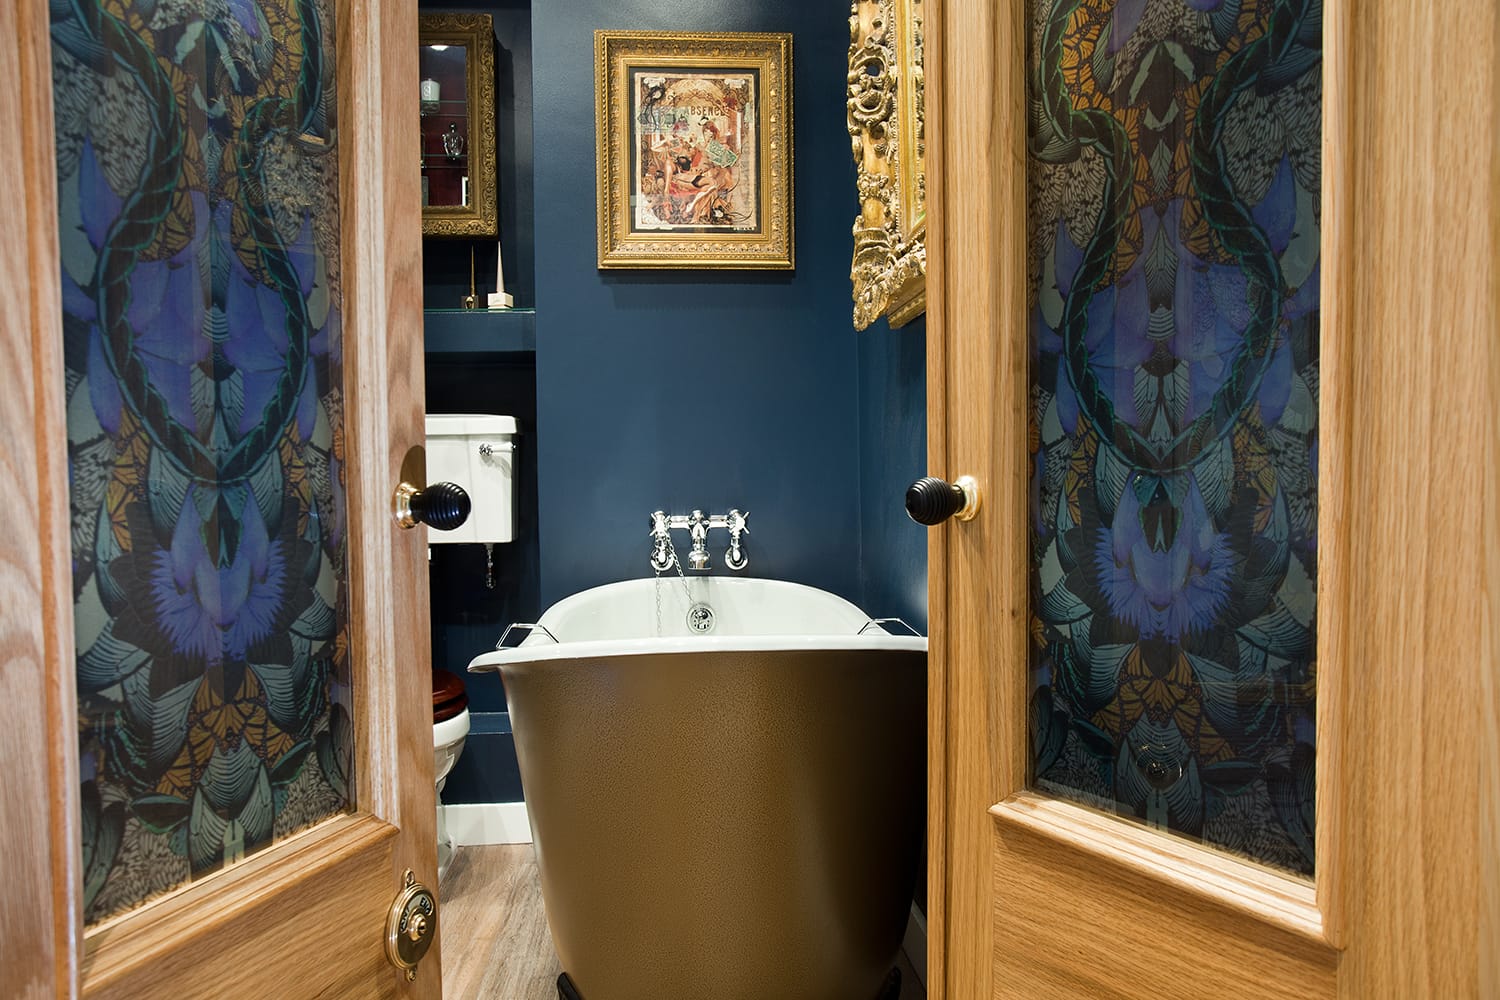 Image: Glamorous bathroom boudoir with rich blue walls and gold accents